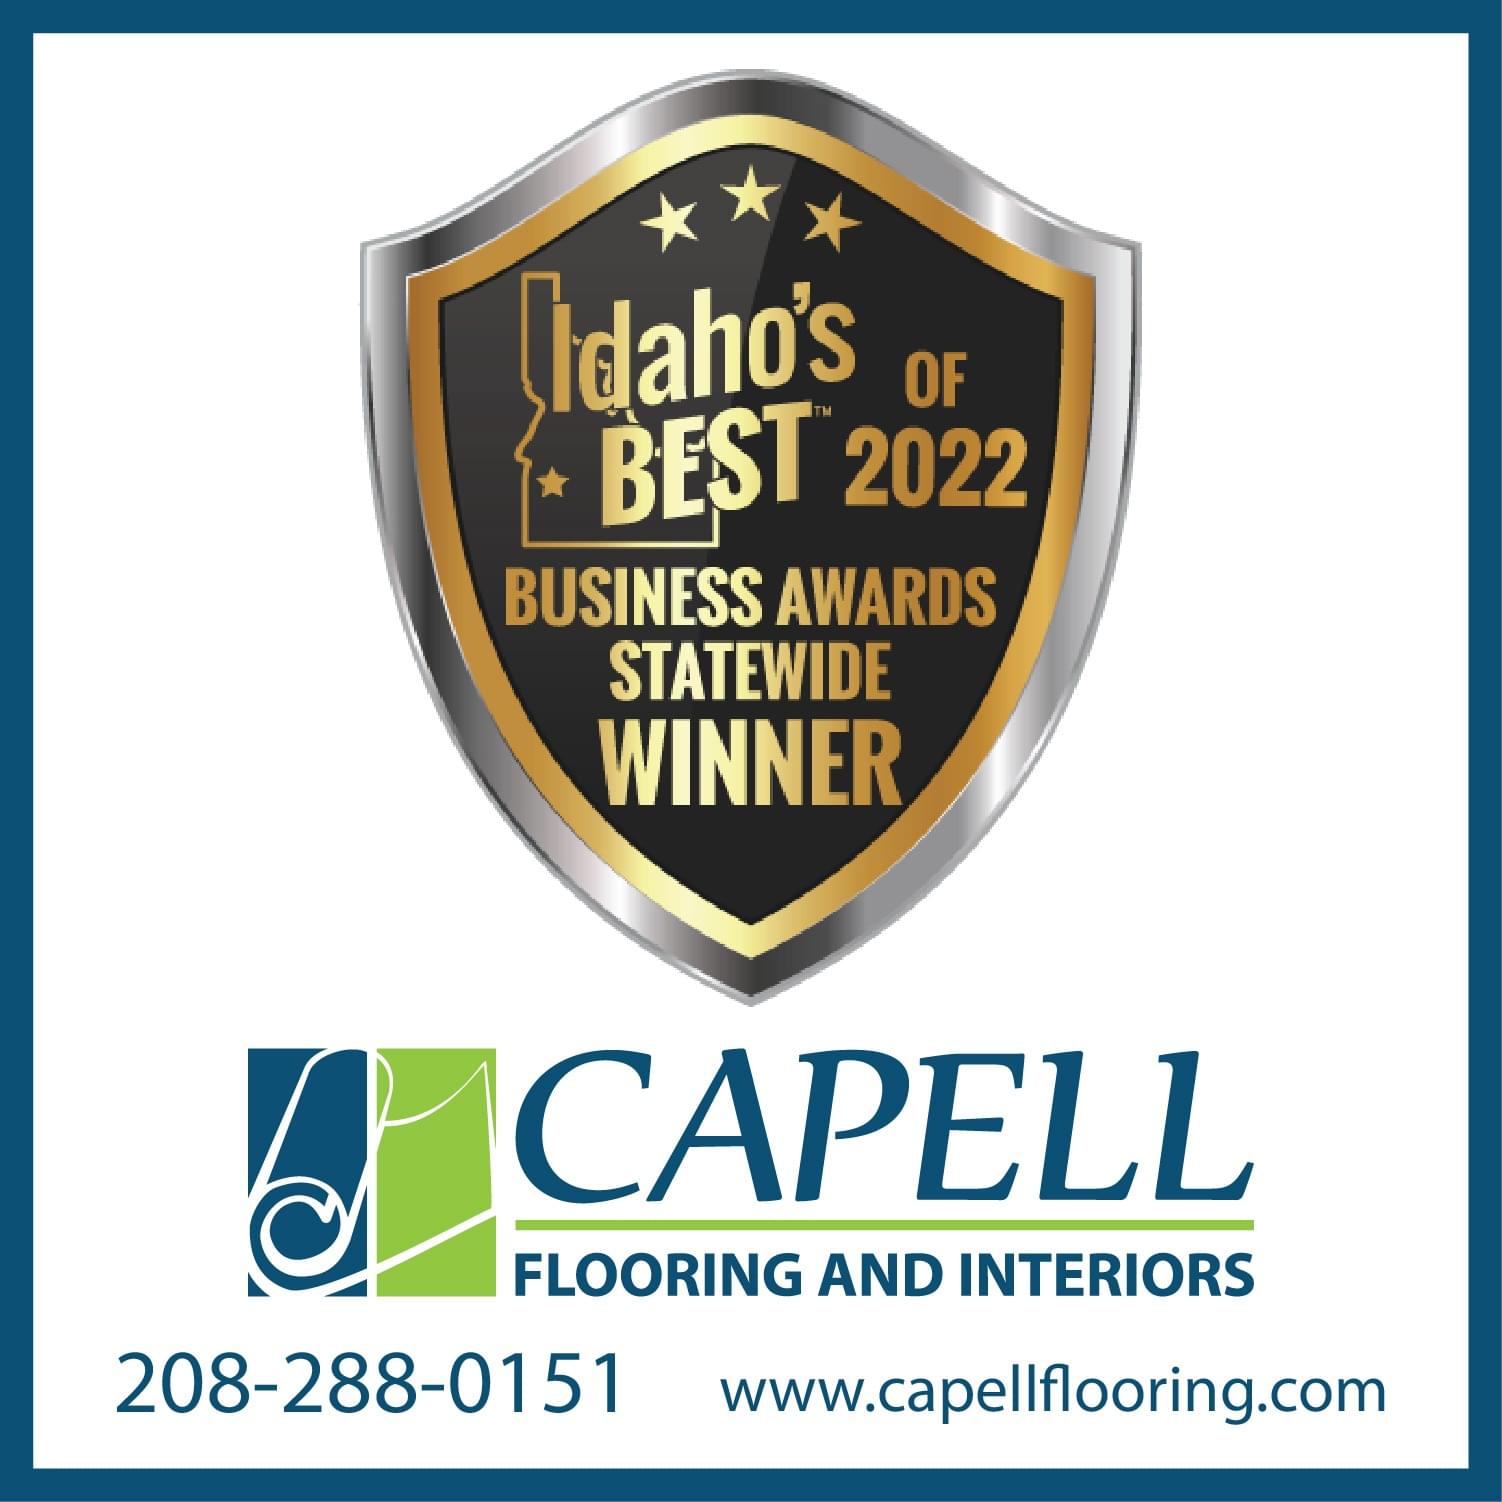 Capell Flooring and Interiors Voted Idahos Best Flooring Store 2020 2021 and 2022